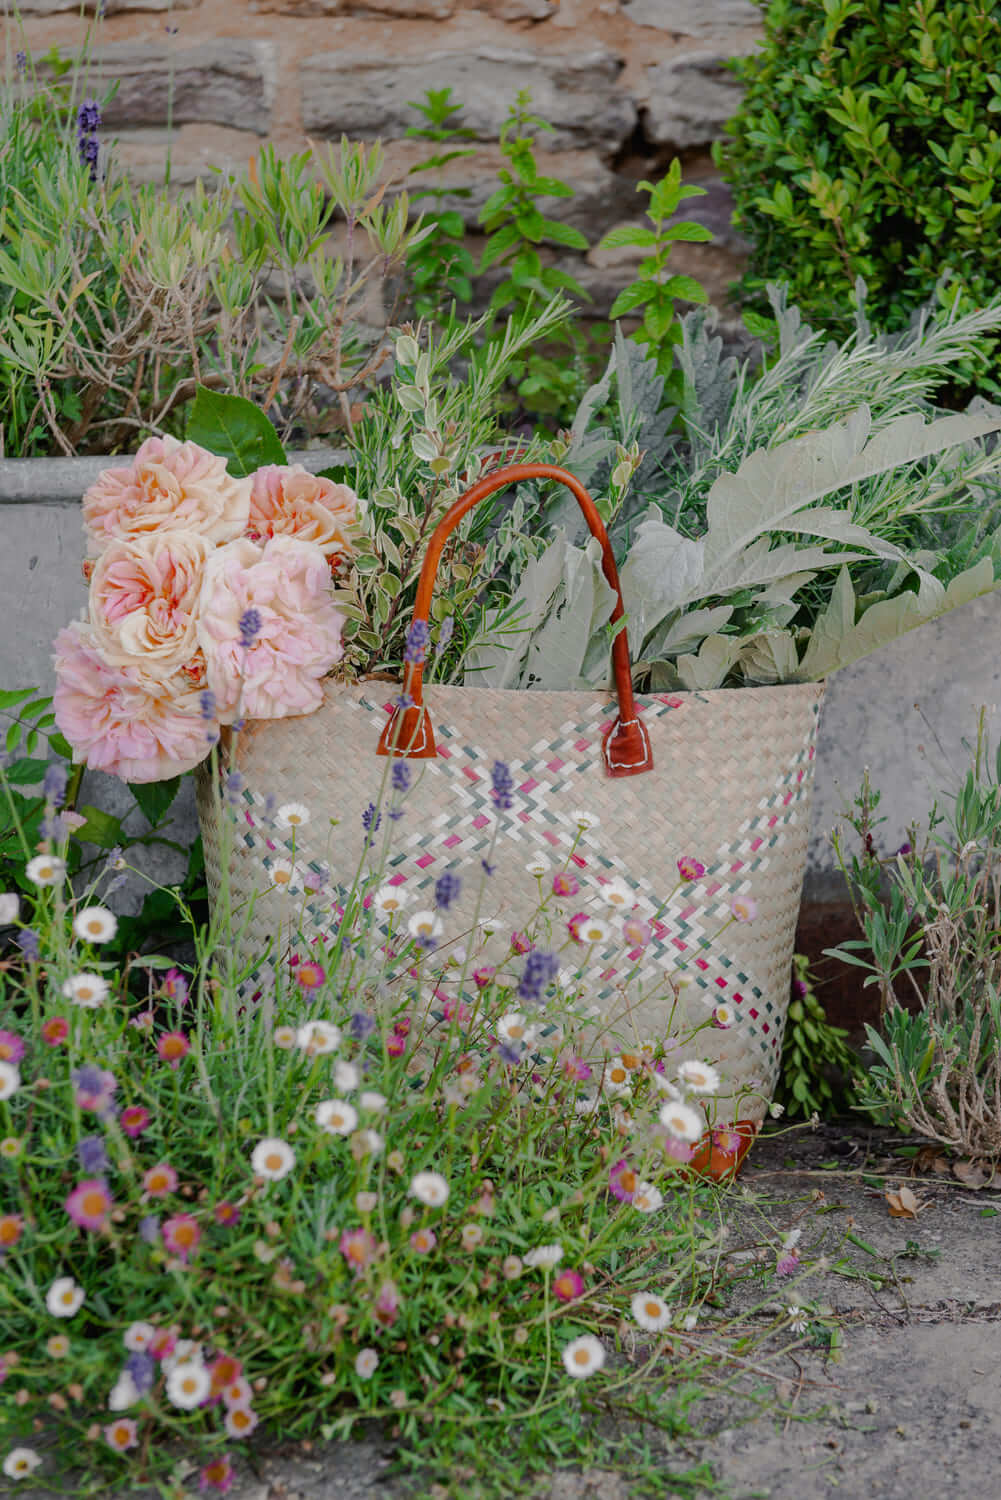 woven bag containing flowers and vegetables